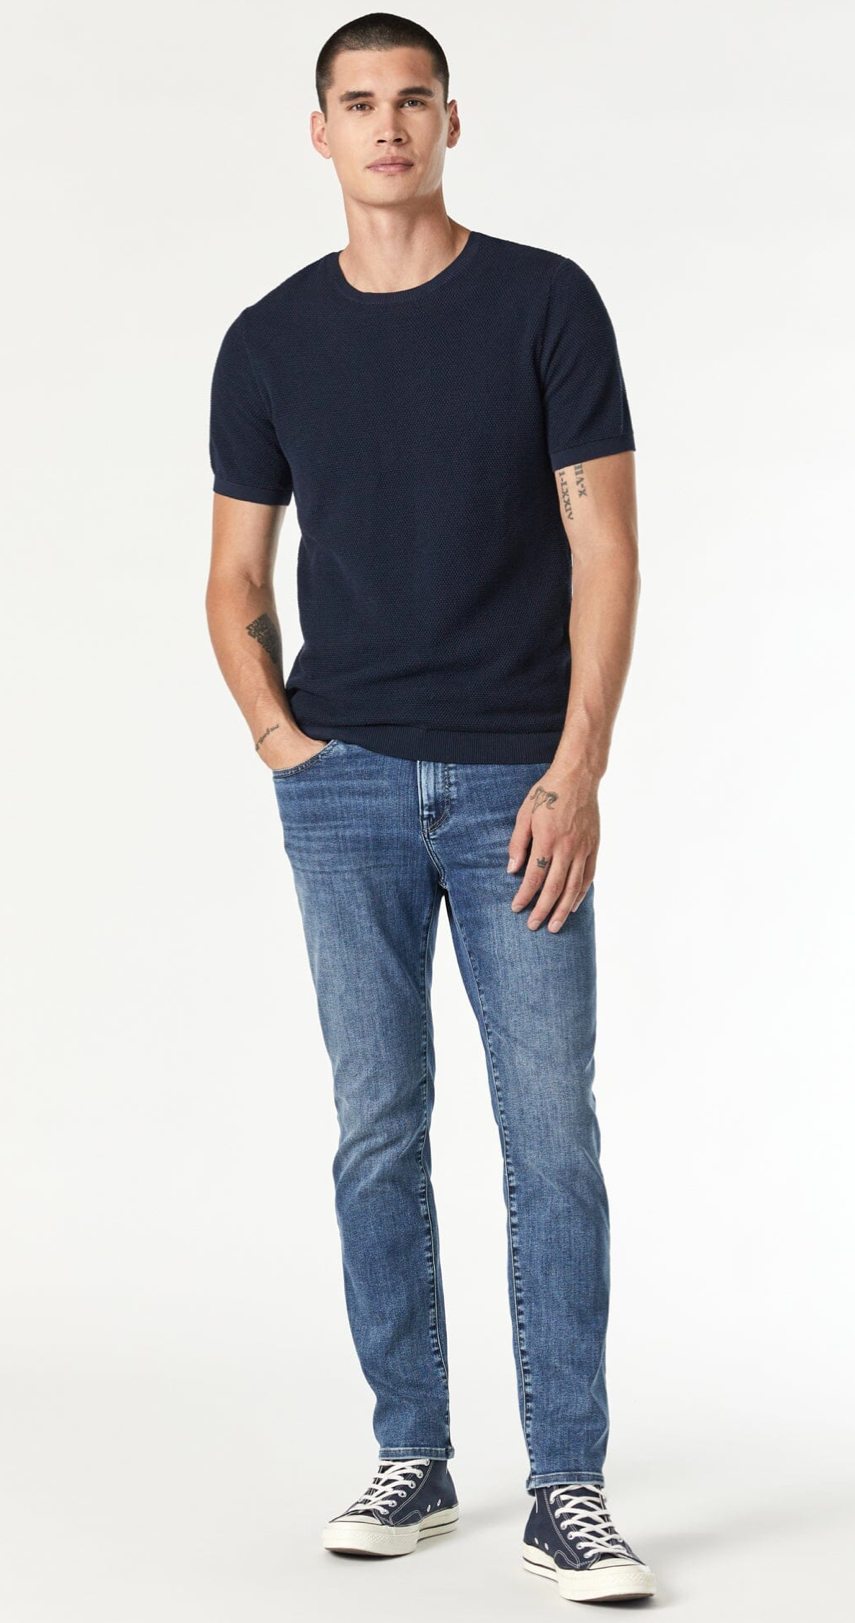 Zach straight leg jeans - deep brushed feather blue copy